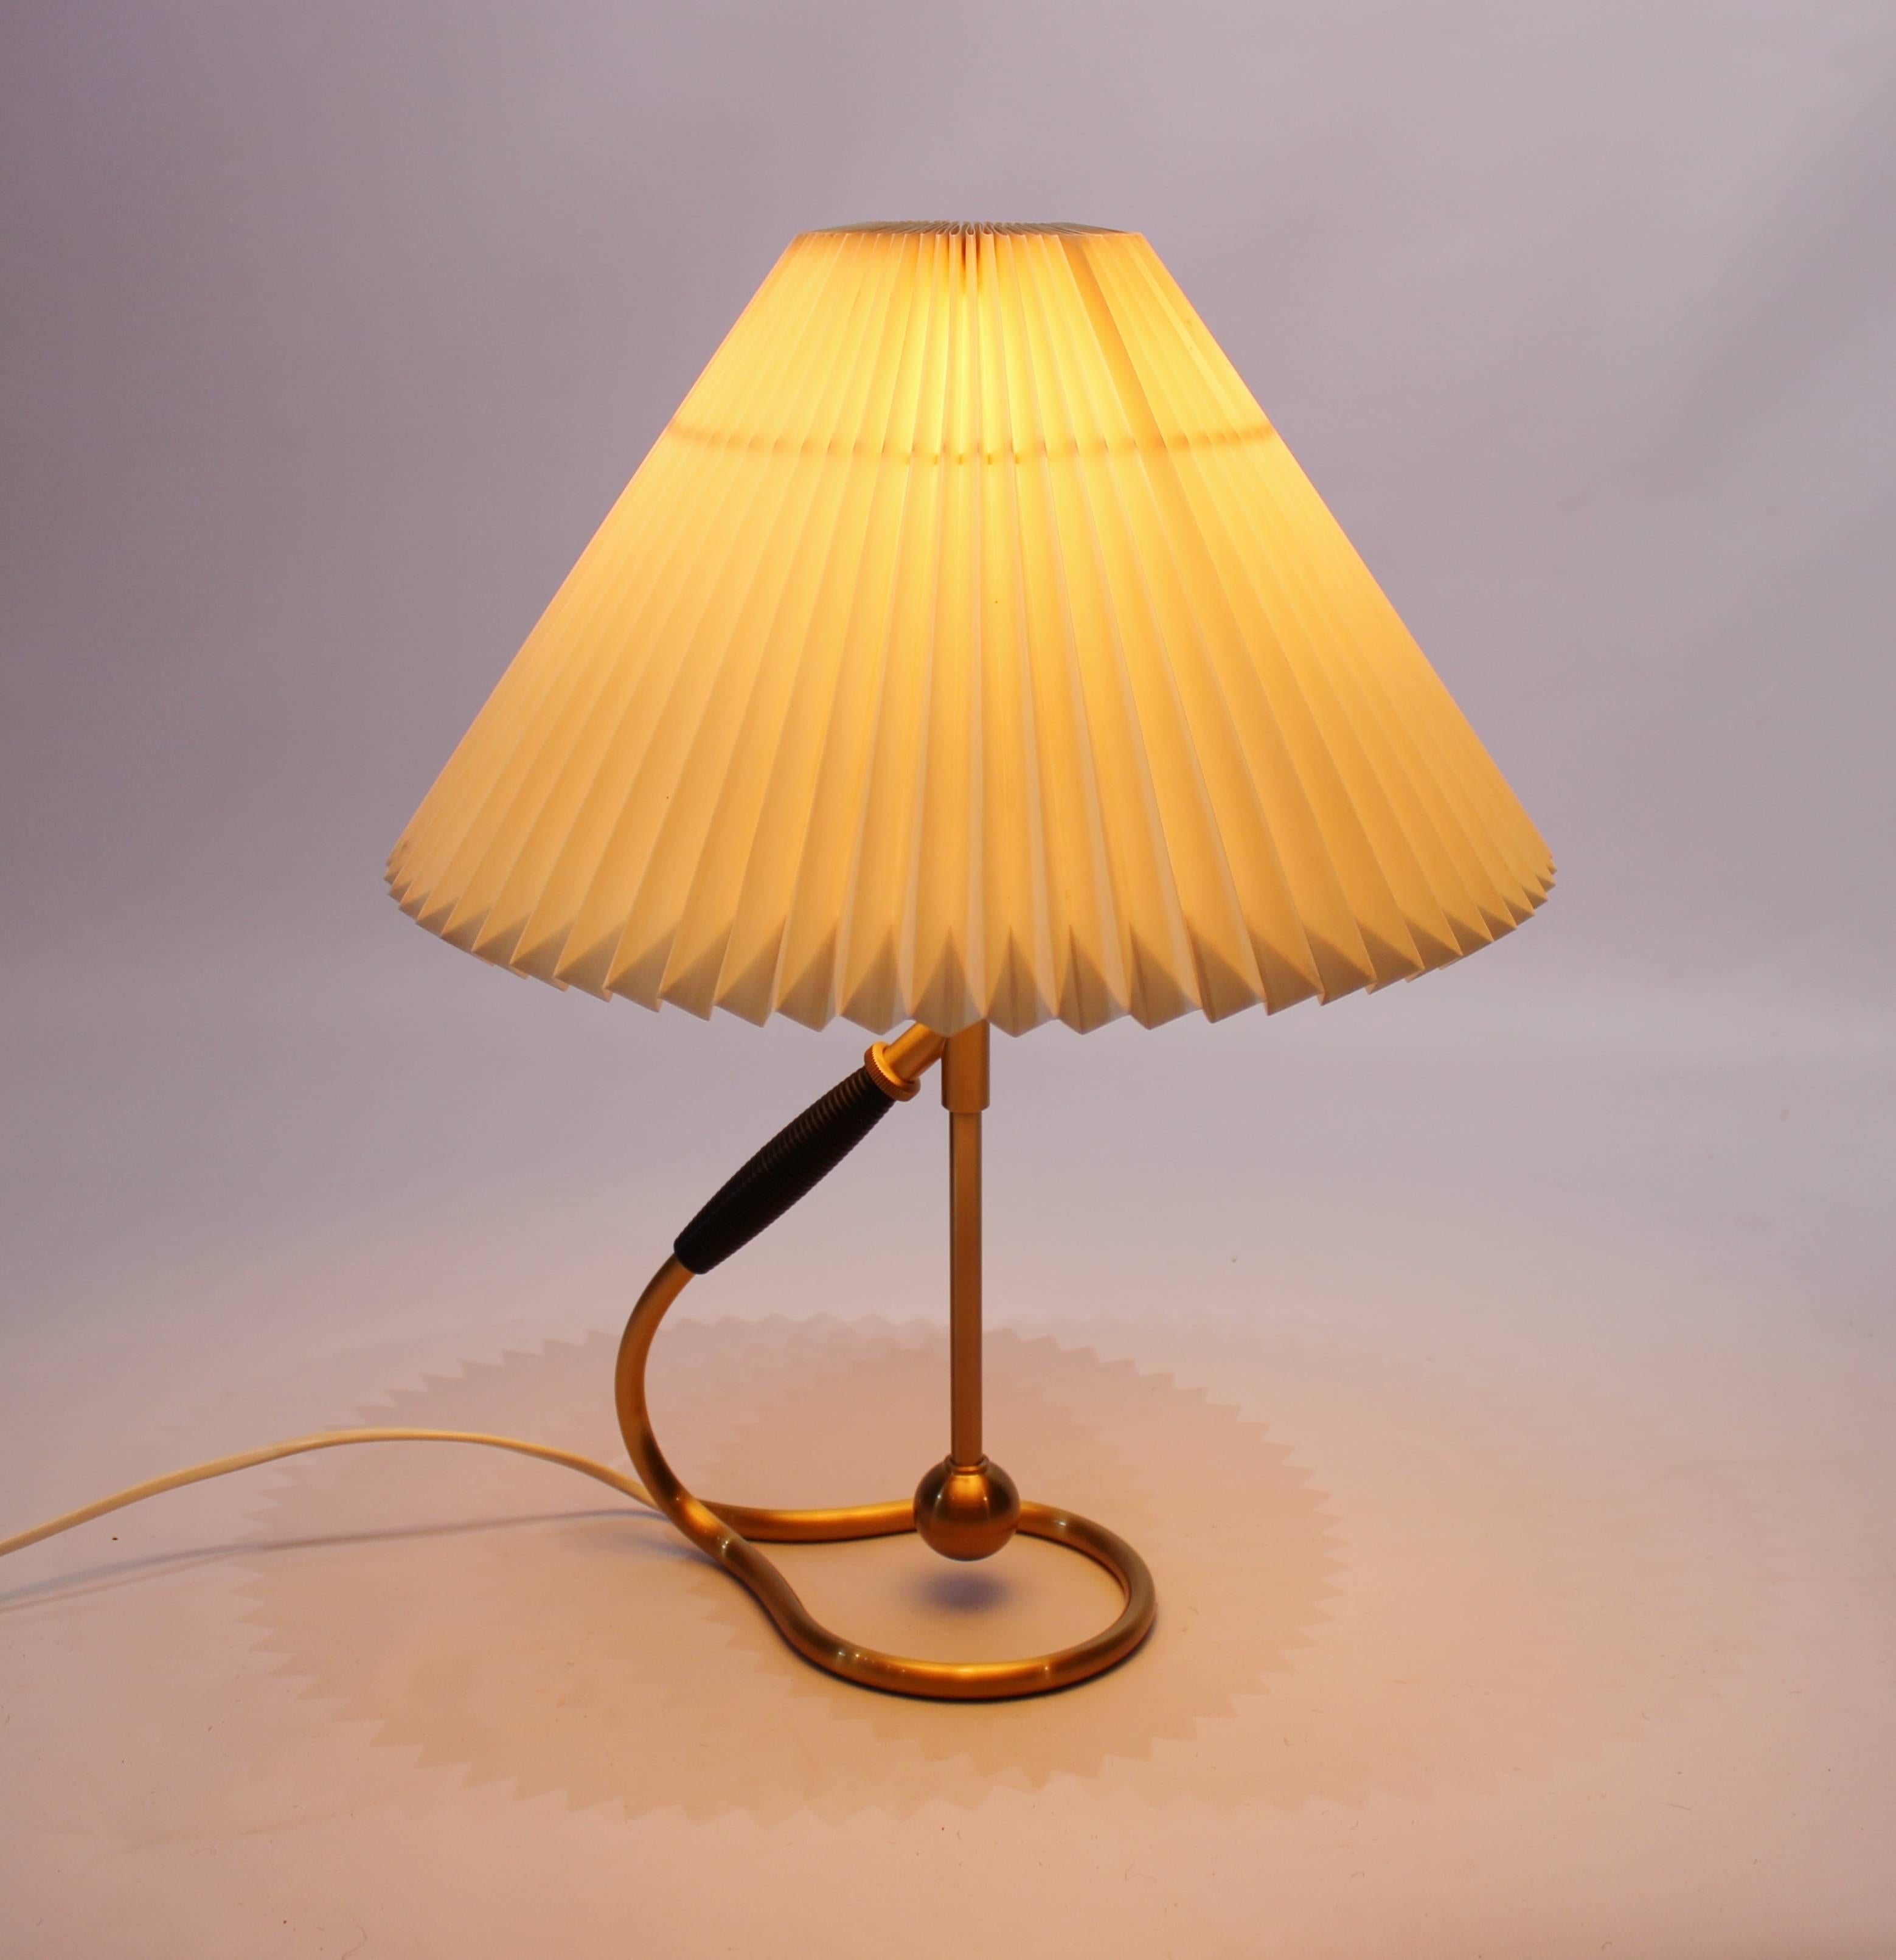 Table lamp, model 306, in brass with tilting function designed by Kaare Klint in 1945 and manufactured by Le Klint. The lamp is in great vintage condition.